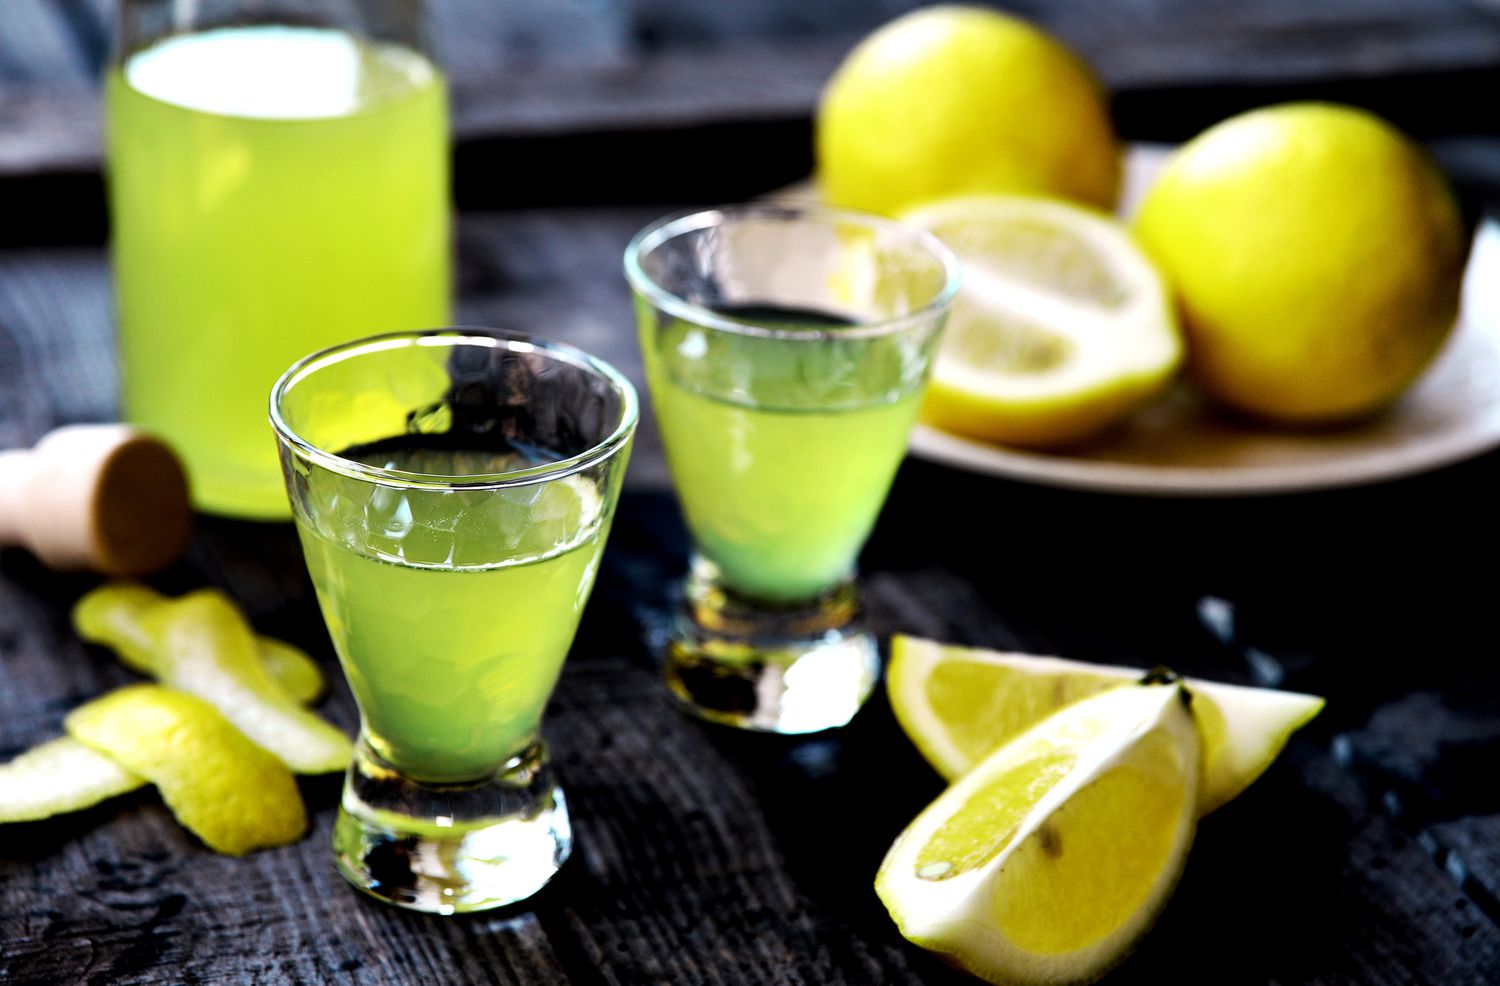 Shots of Limoncello with lemon wedges.